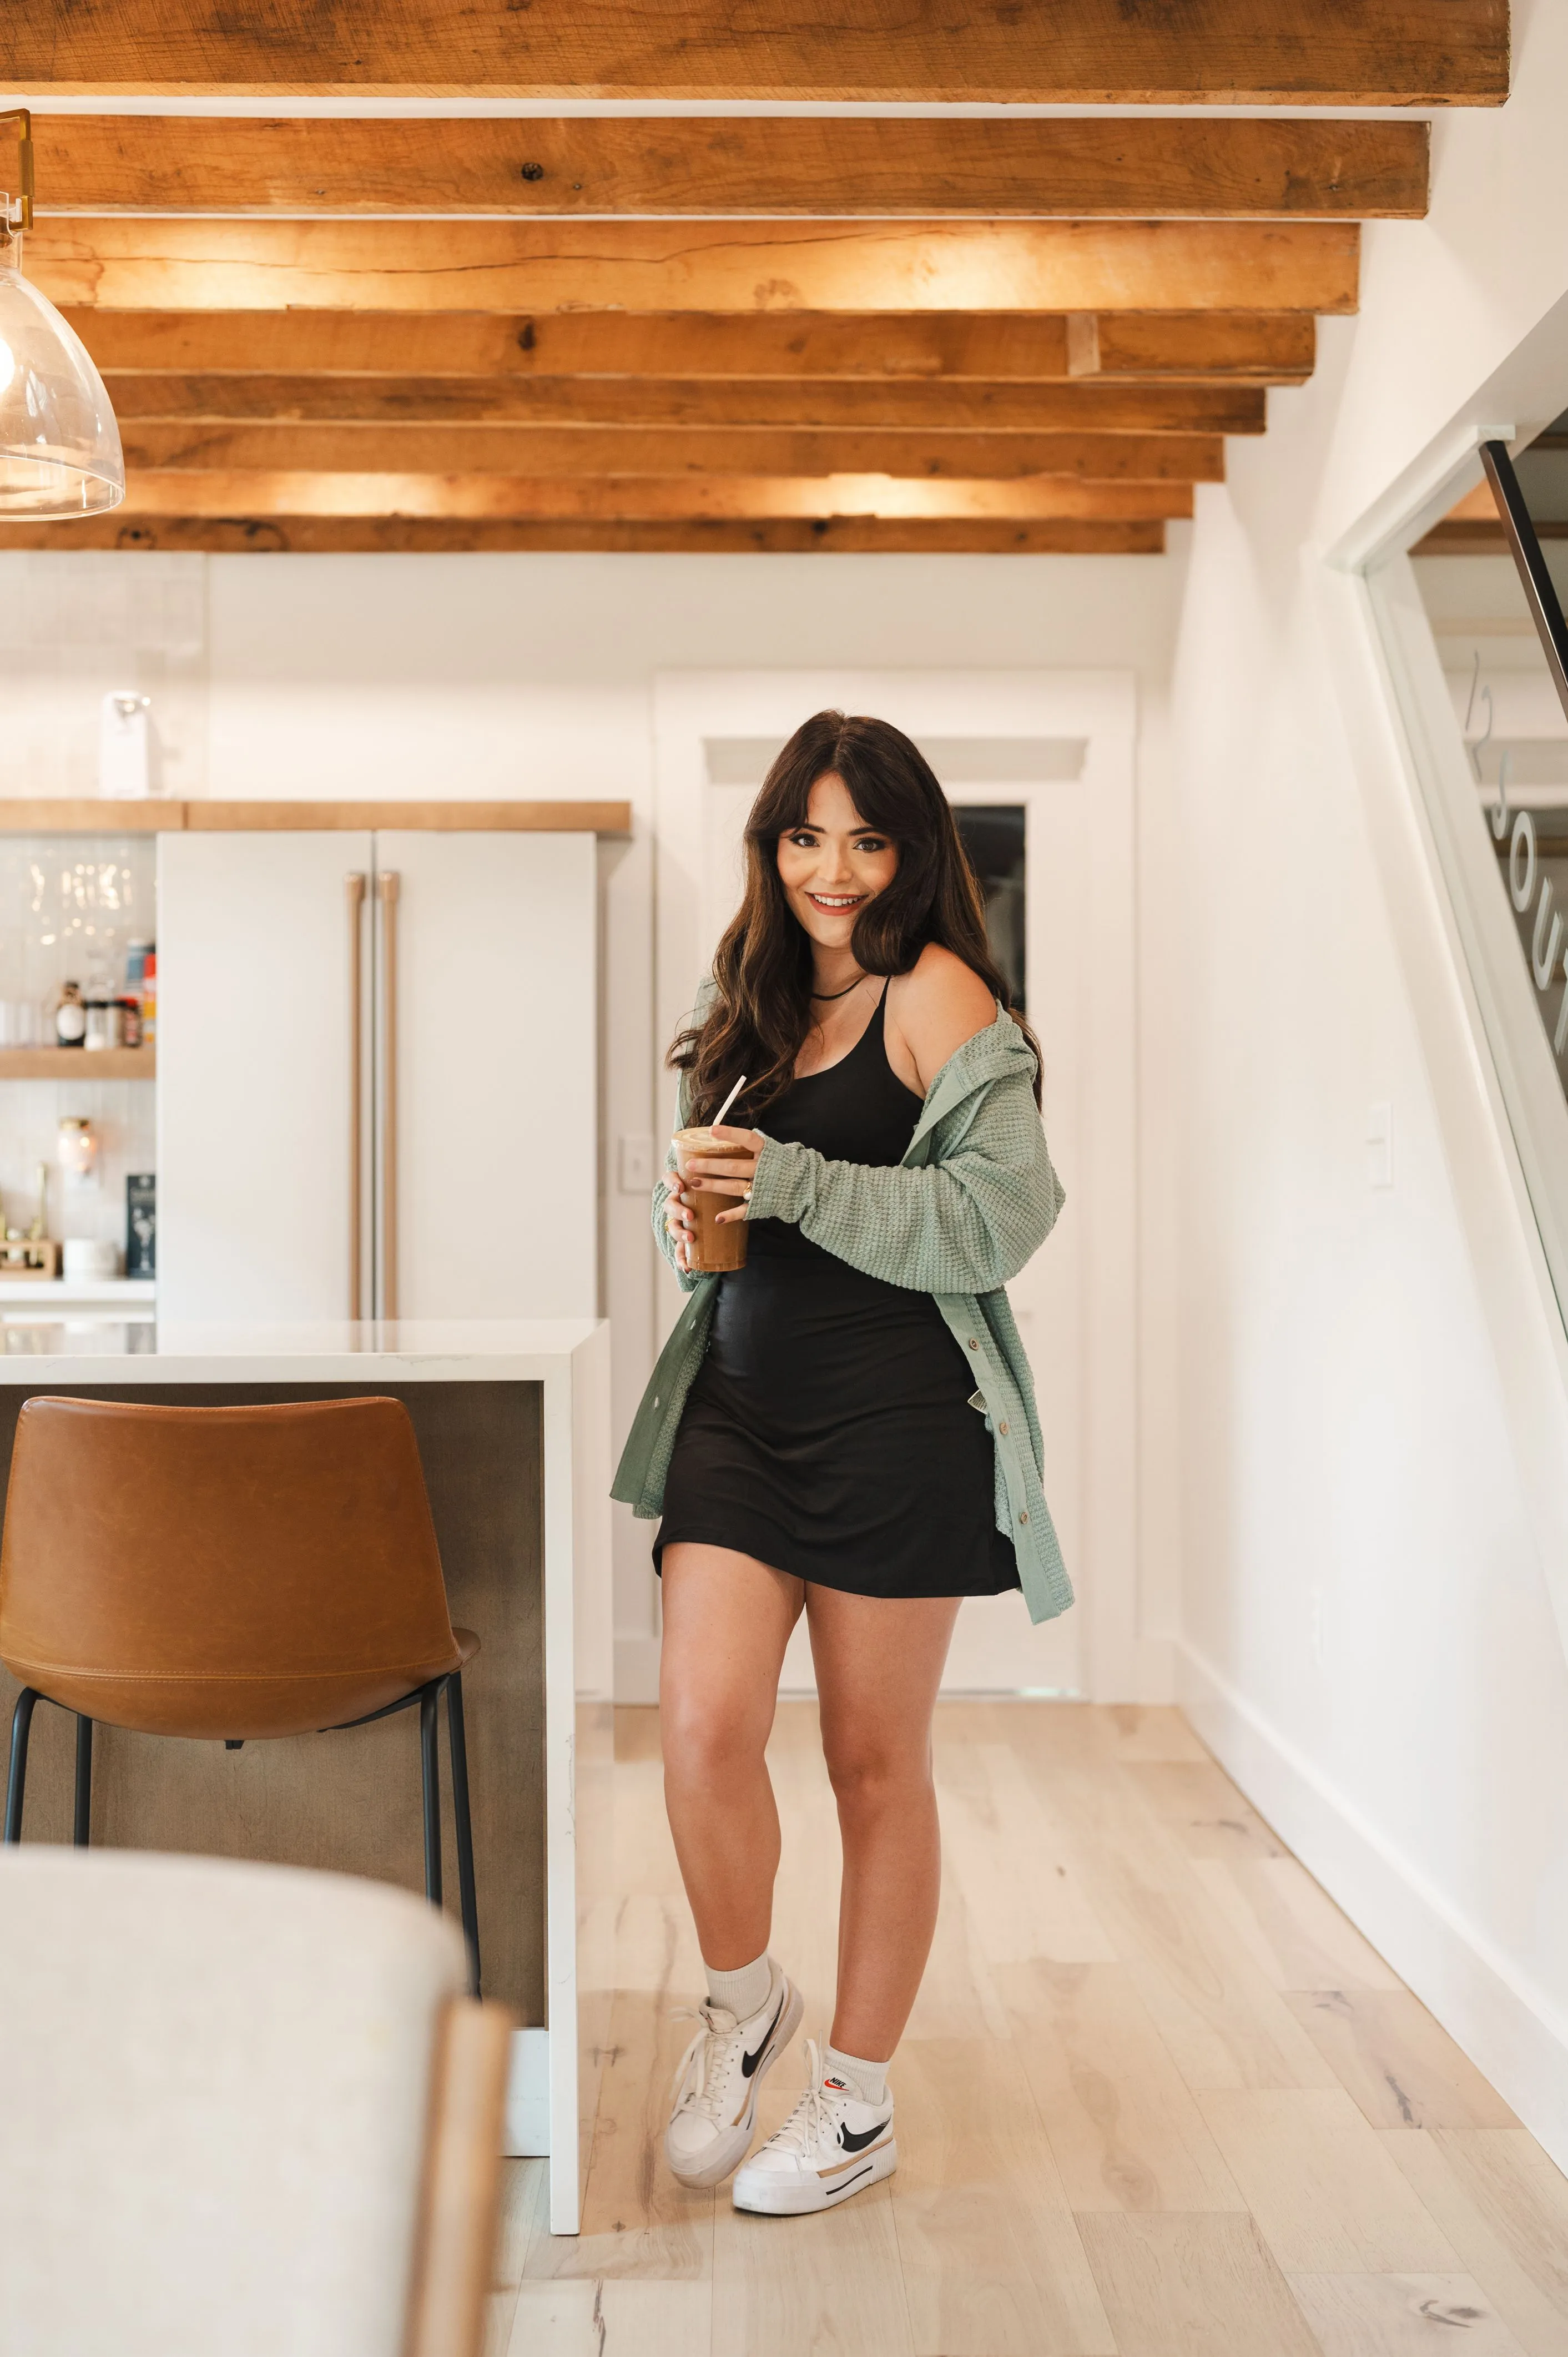 Smiling woman standing in a modern kitchen, holding a cold beverage, wearing a black dress with a green cardigan and white sneakers.